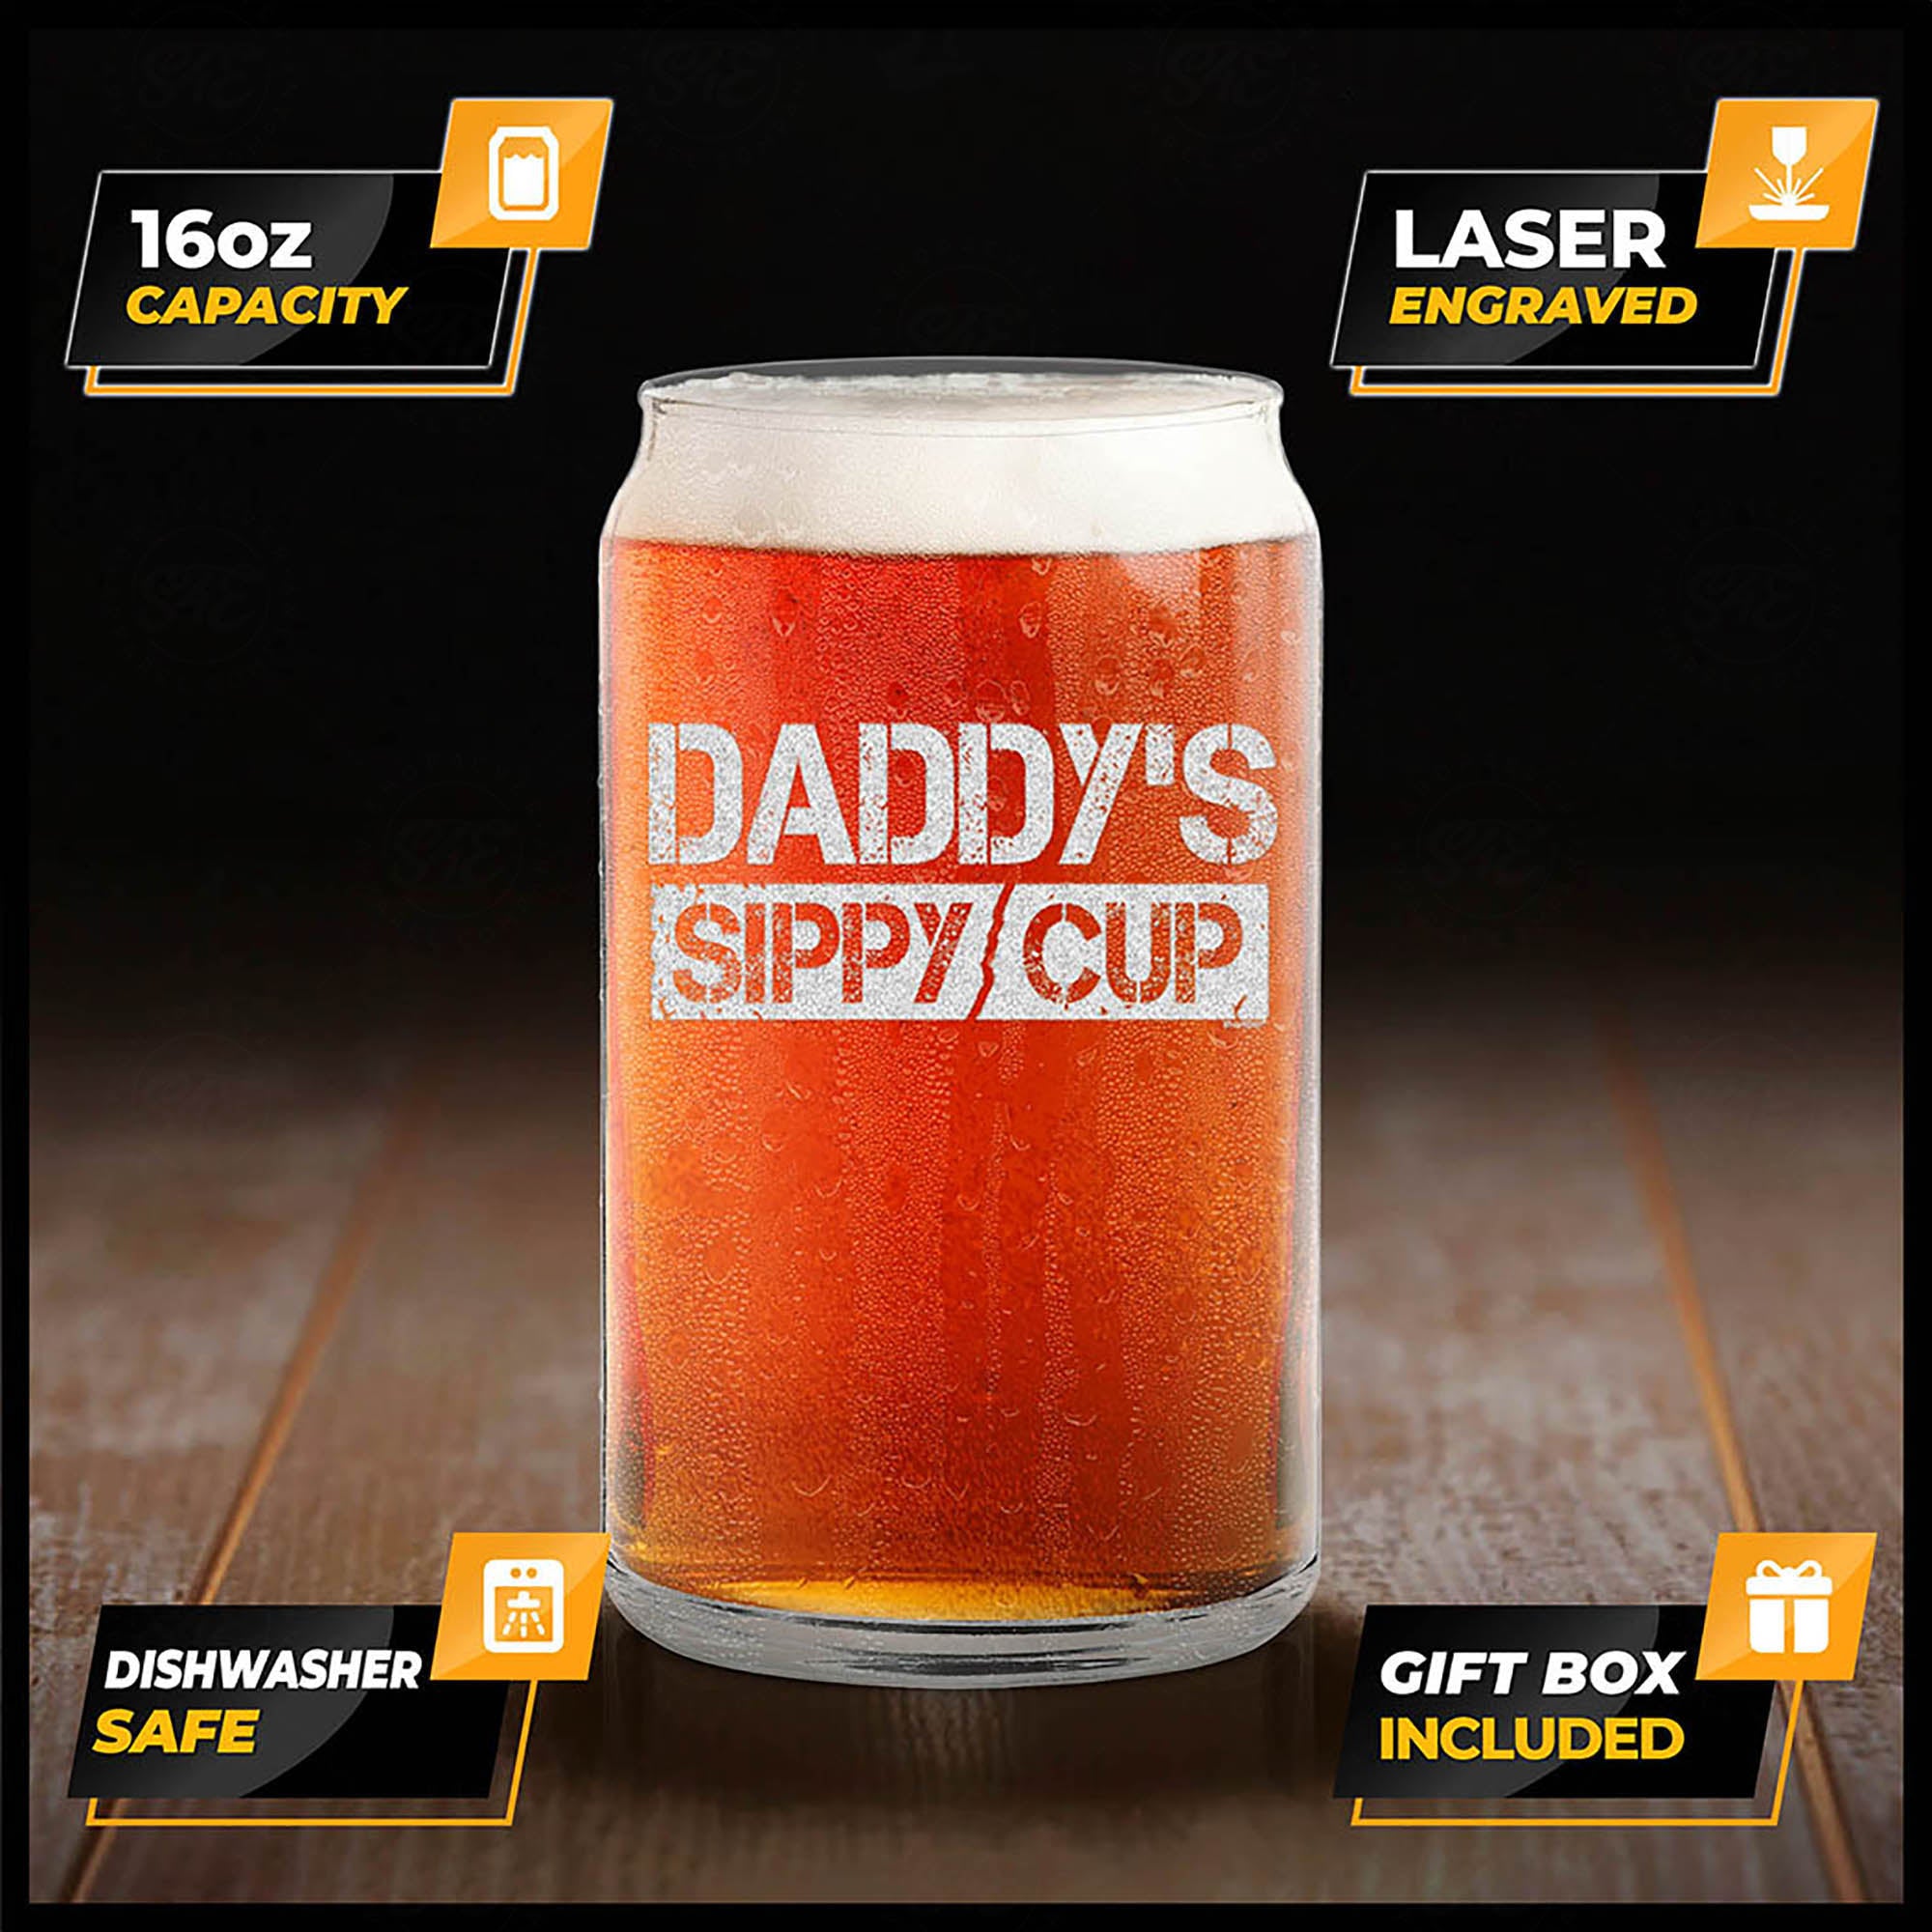 Daddy's Sippy Cup Engraved Beer Can Glass Gift For New Daddy To Be